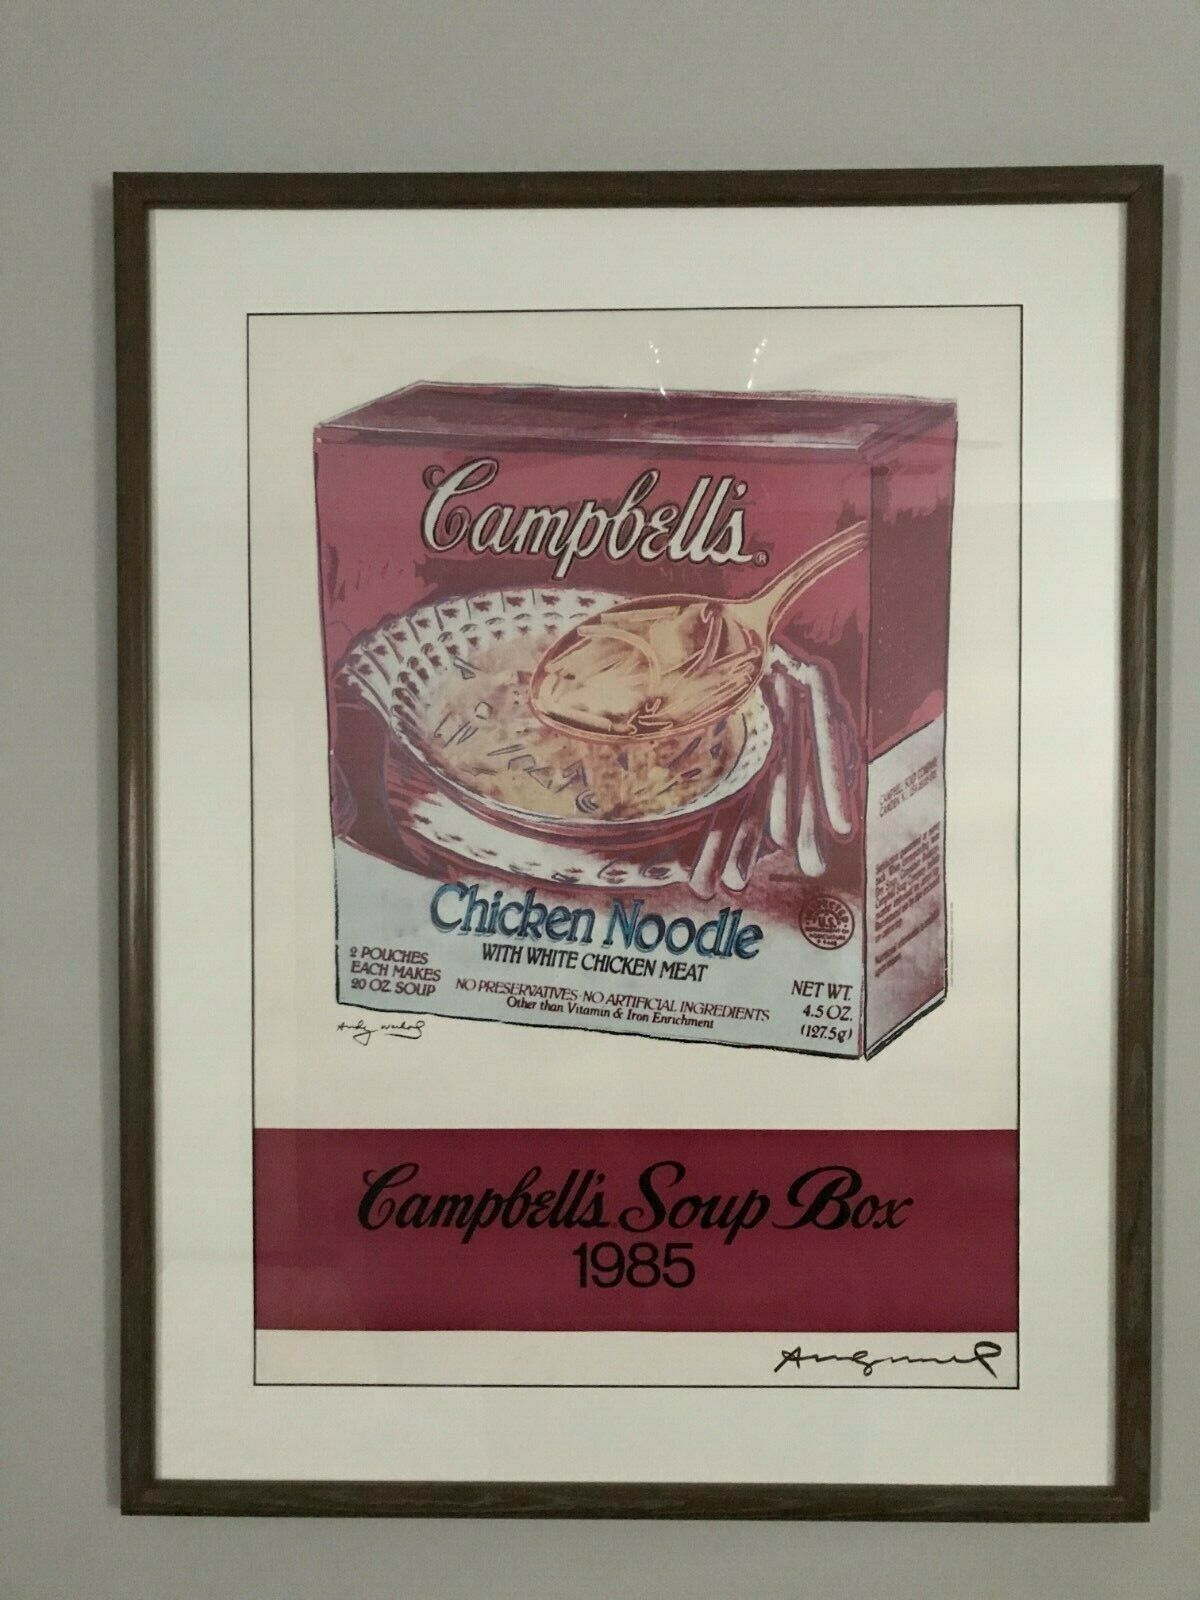 https://www.antique-hq.com/wp-content/uploads/2021/07/Andy-Warhol-lithograph.jpg